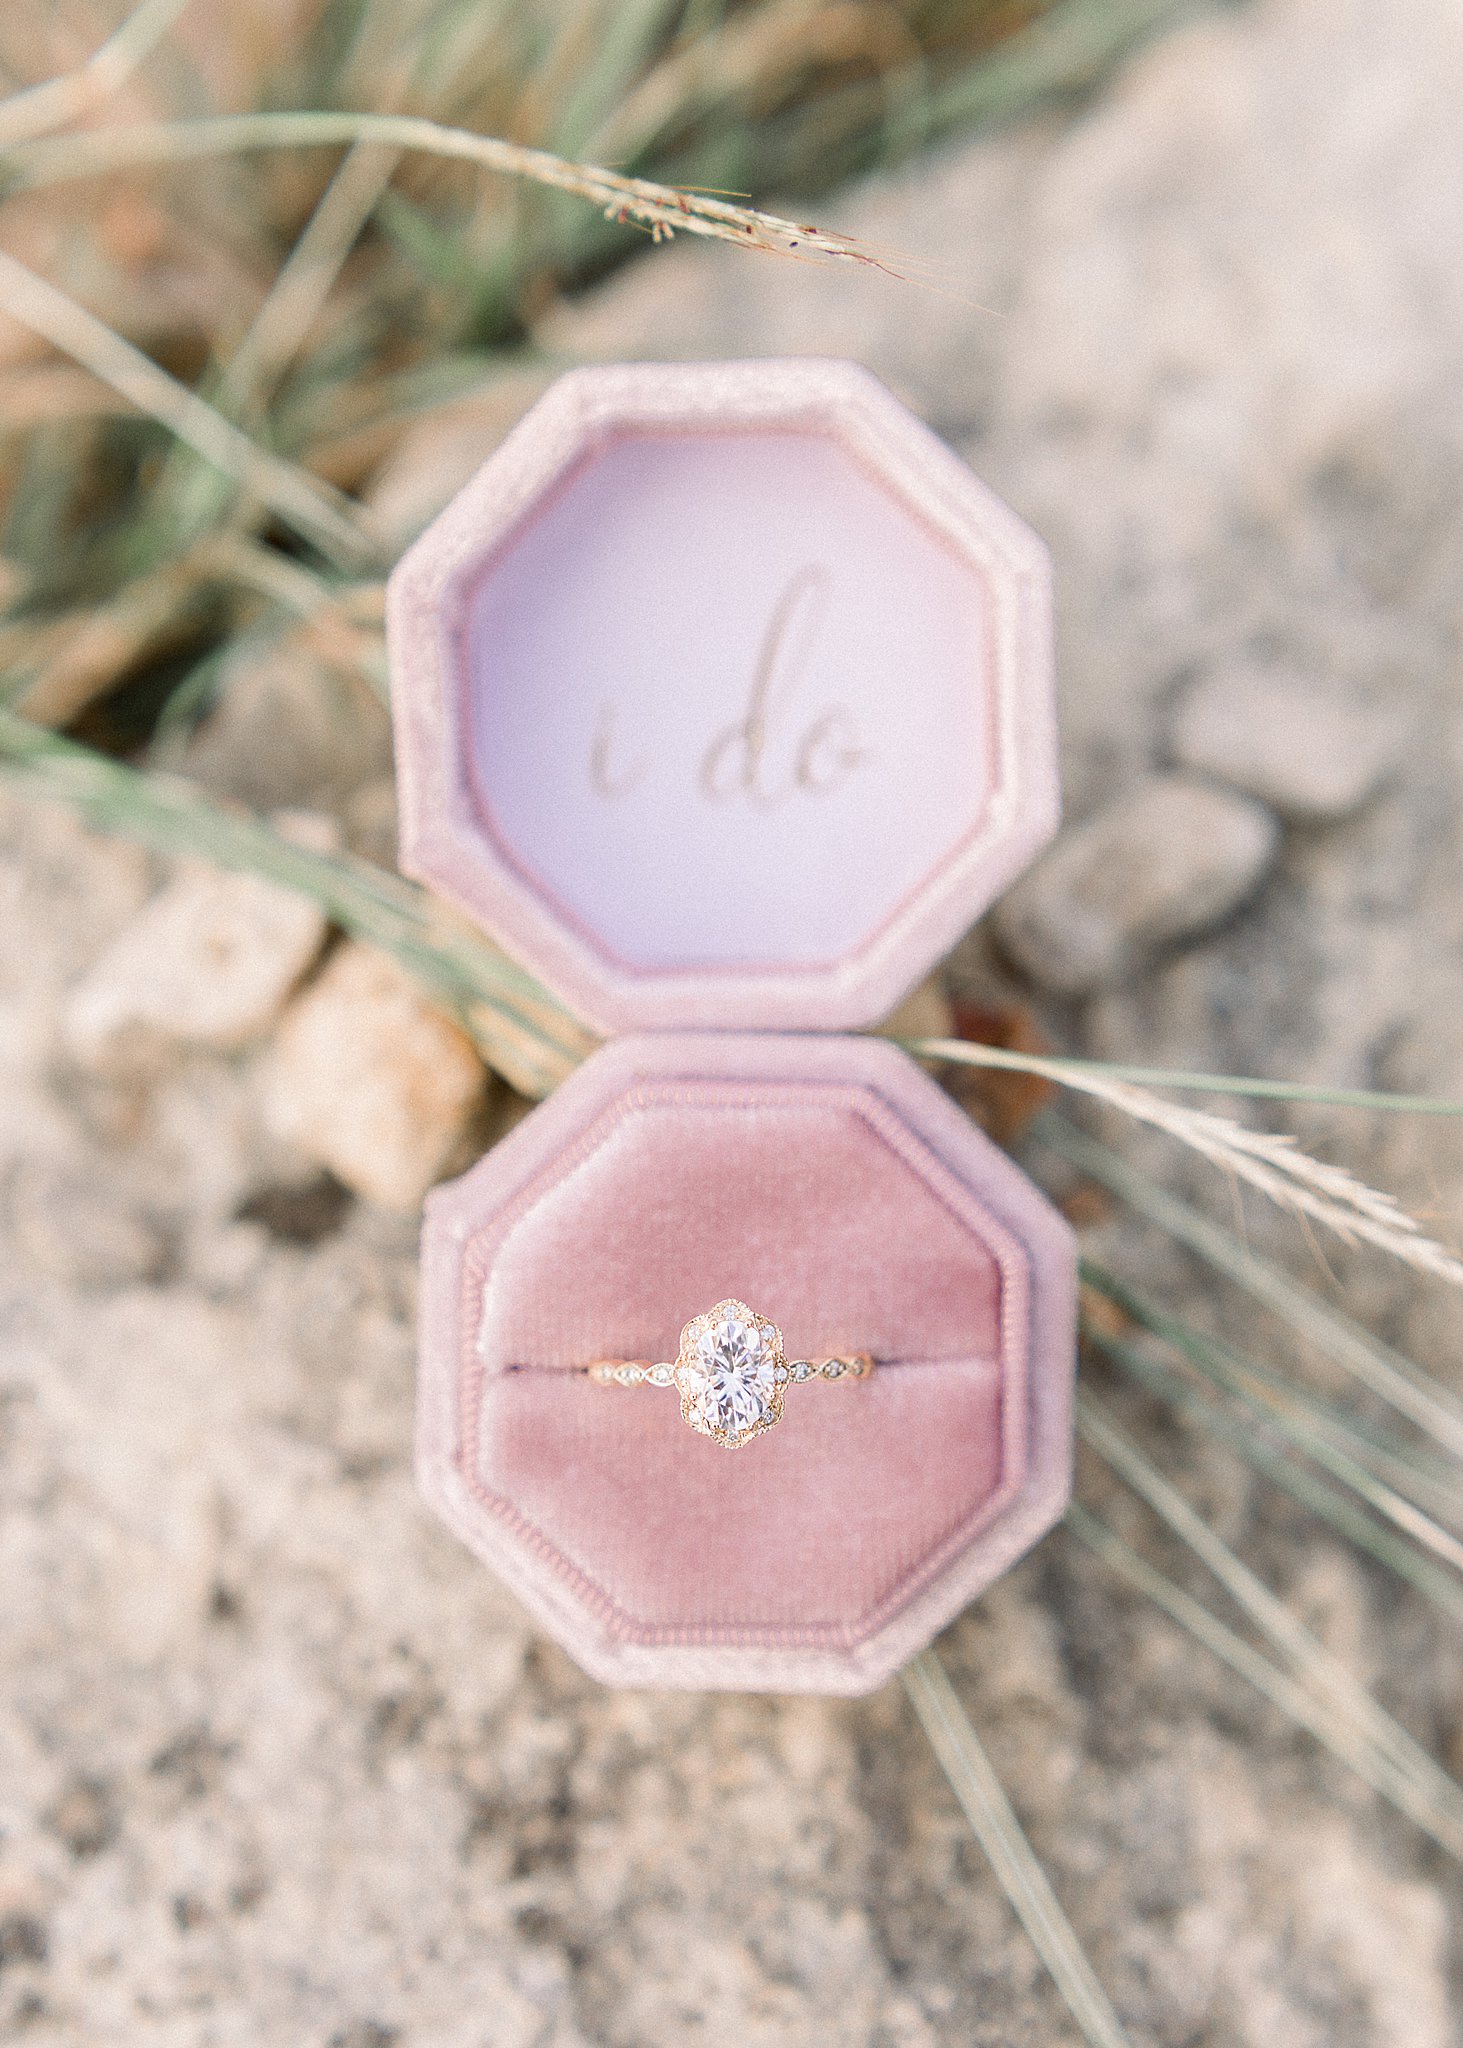 "I Do" Velvet Ring Box, Oval Engagement Ring, Anna Kay Photography, Hill Country Wedding Photography